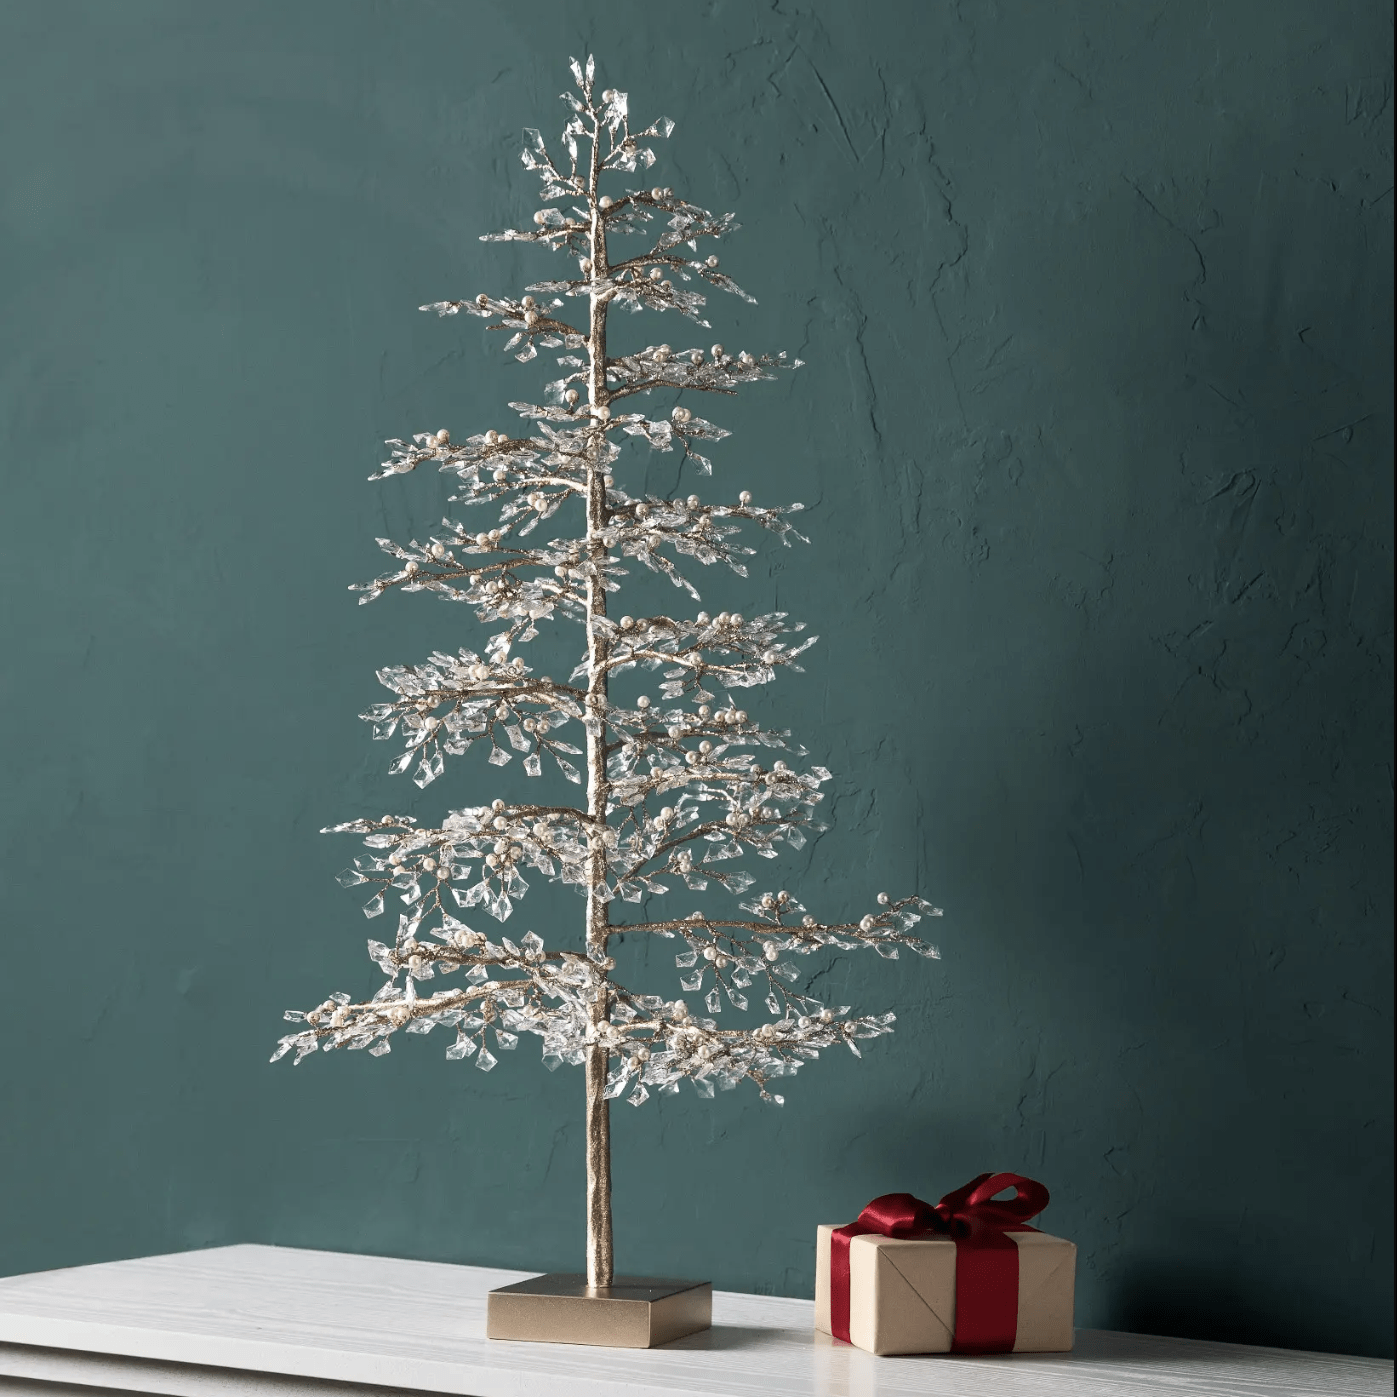 5 Sustainable & Cheap Ways To Decorate Christmas Trees in 2023